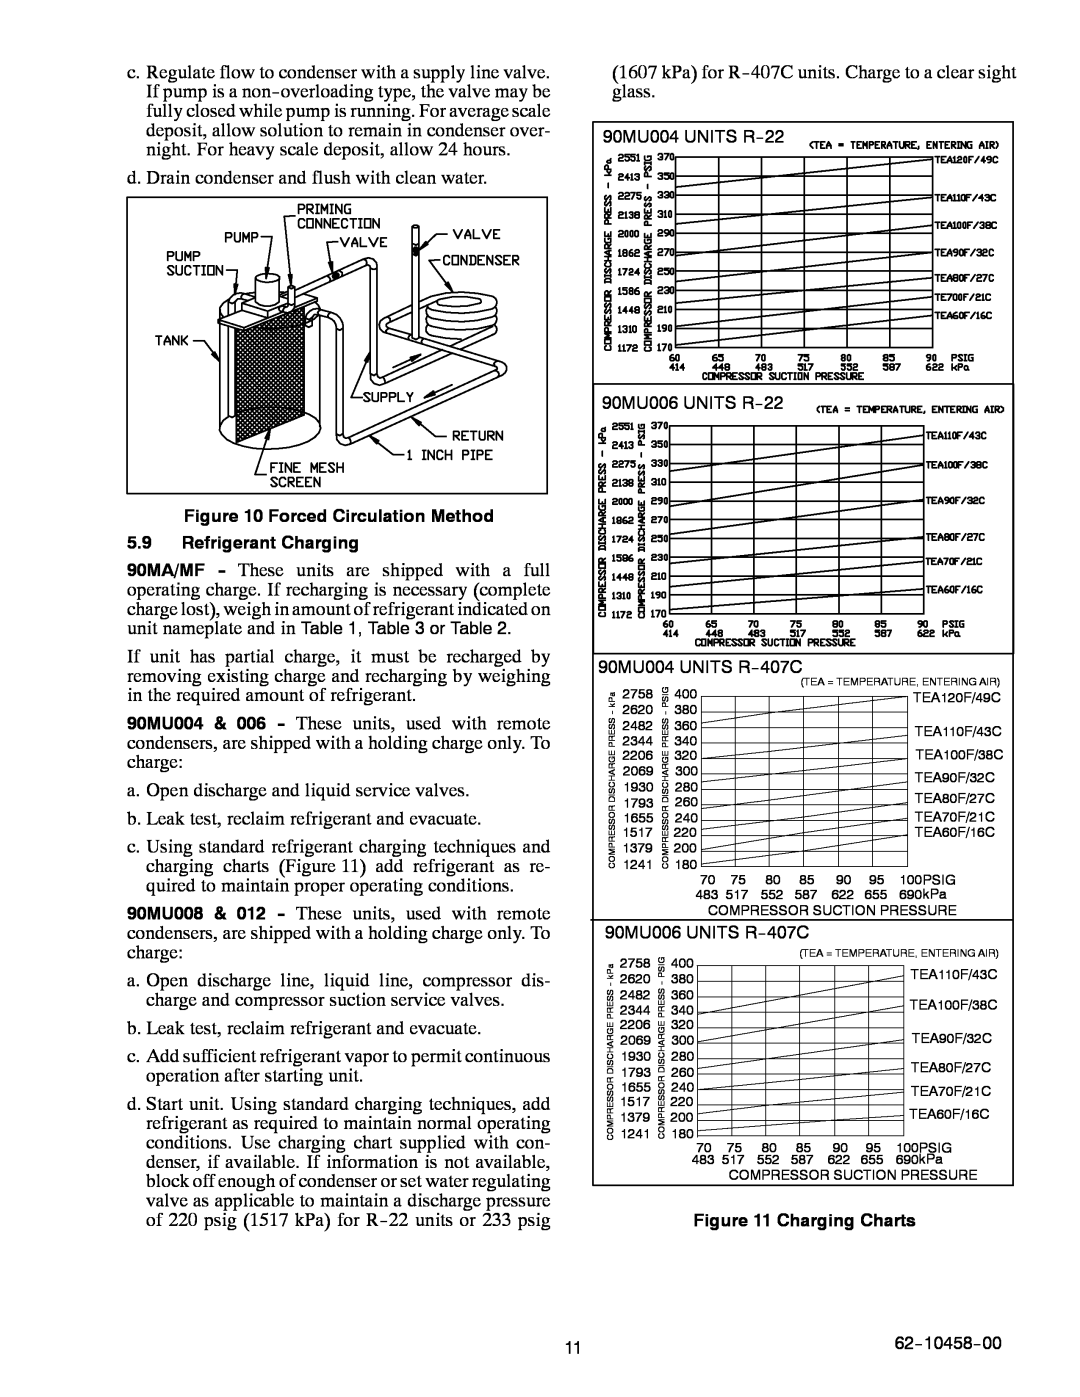 Carrier 90MA/MF/MU manual d.Drain condenser and flush with clean water 